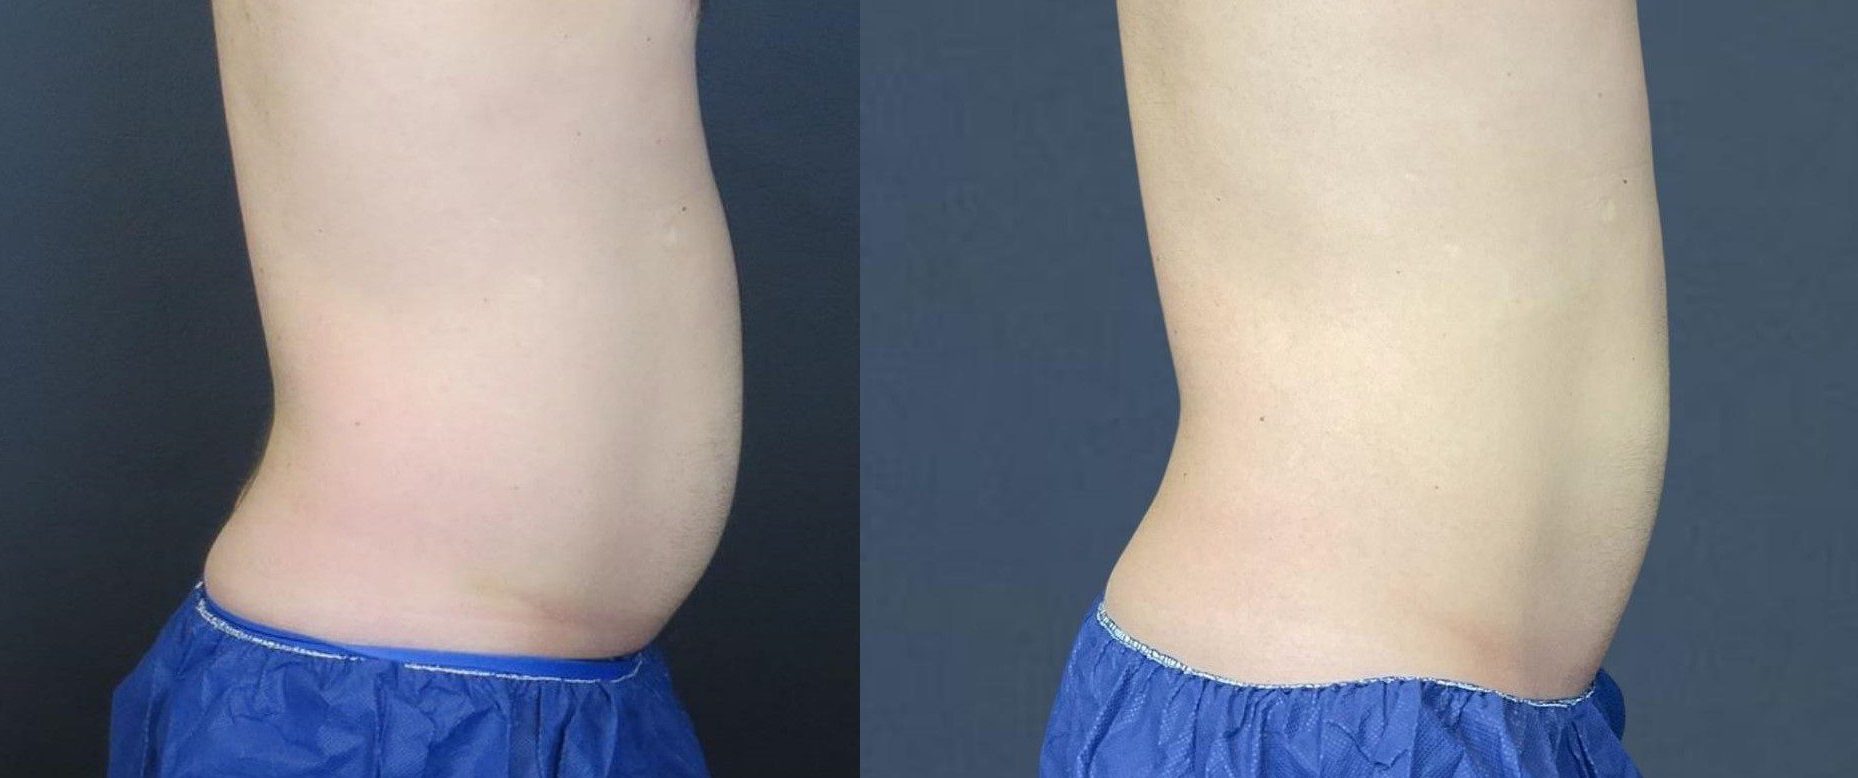 coolsculpting before and after abdomen fat freezing